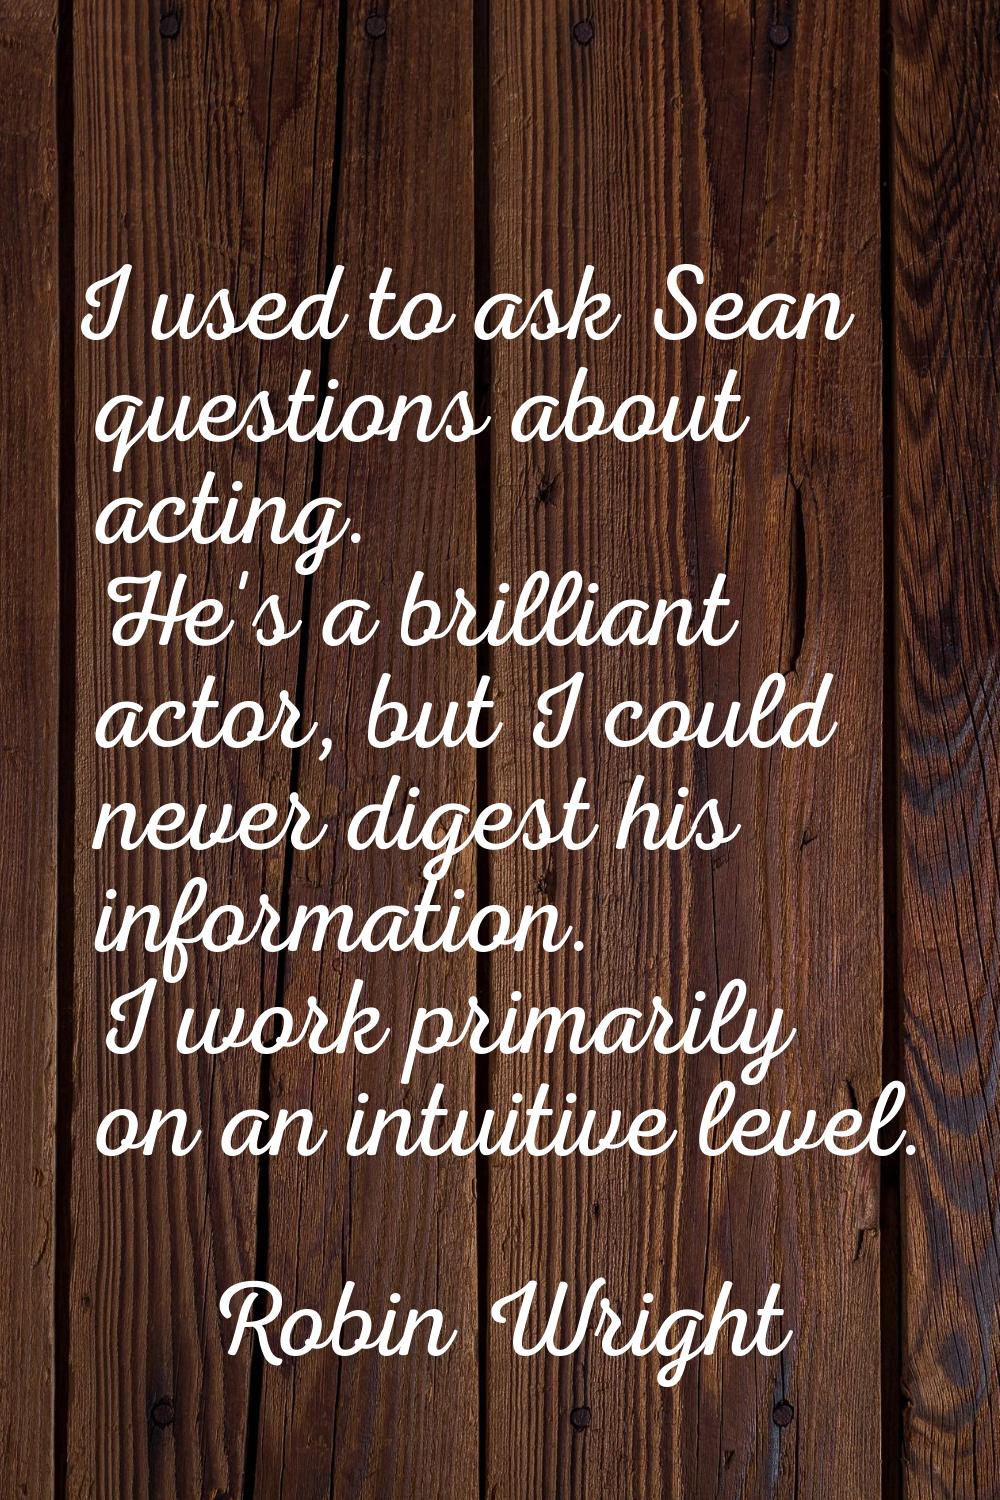 I used to ask Sean questions about acting. He's a brilliant actor, but I could never digest his inf